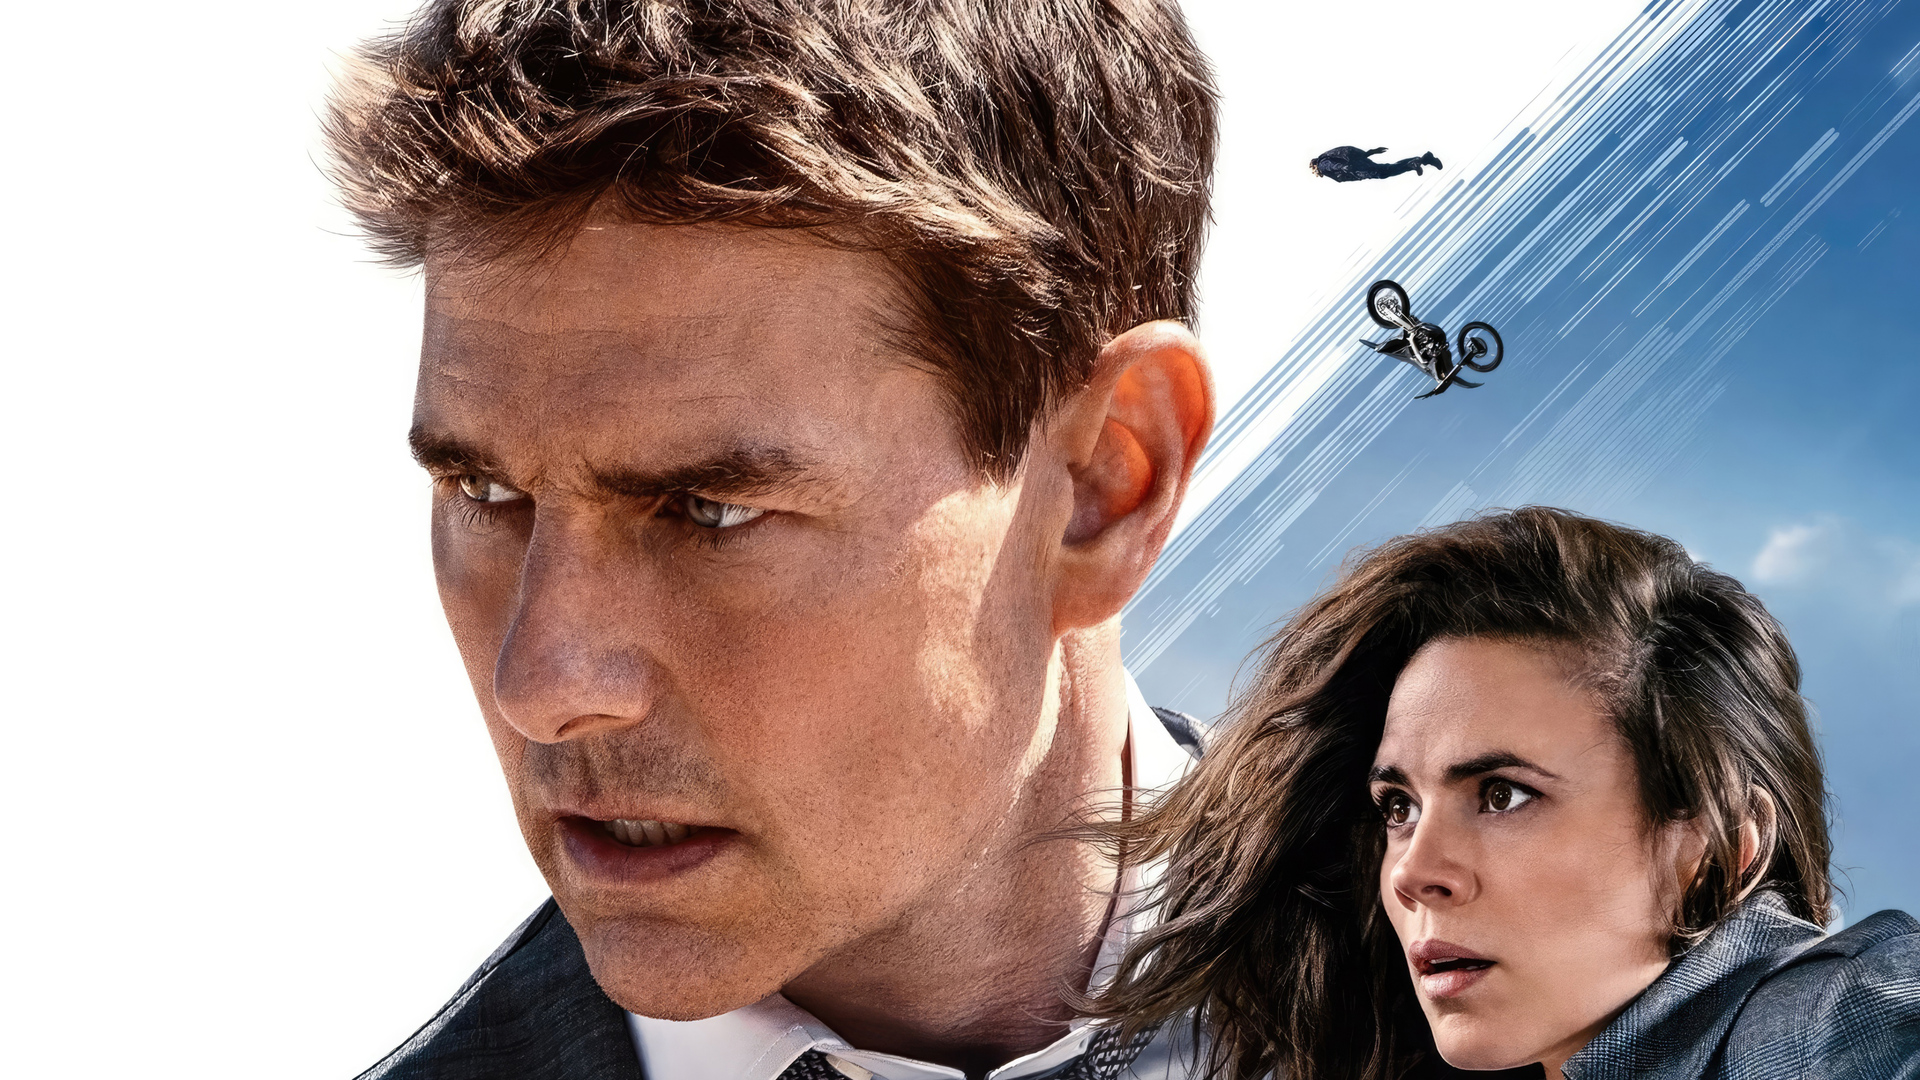 tom cruise mission impossible dead reckoning review